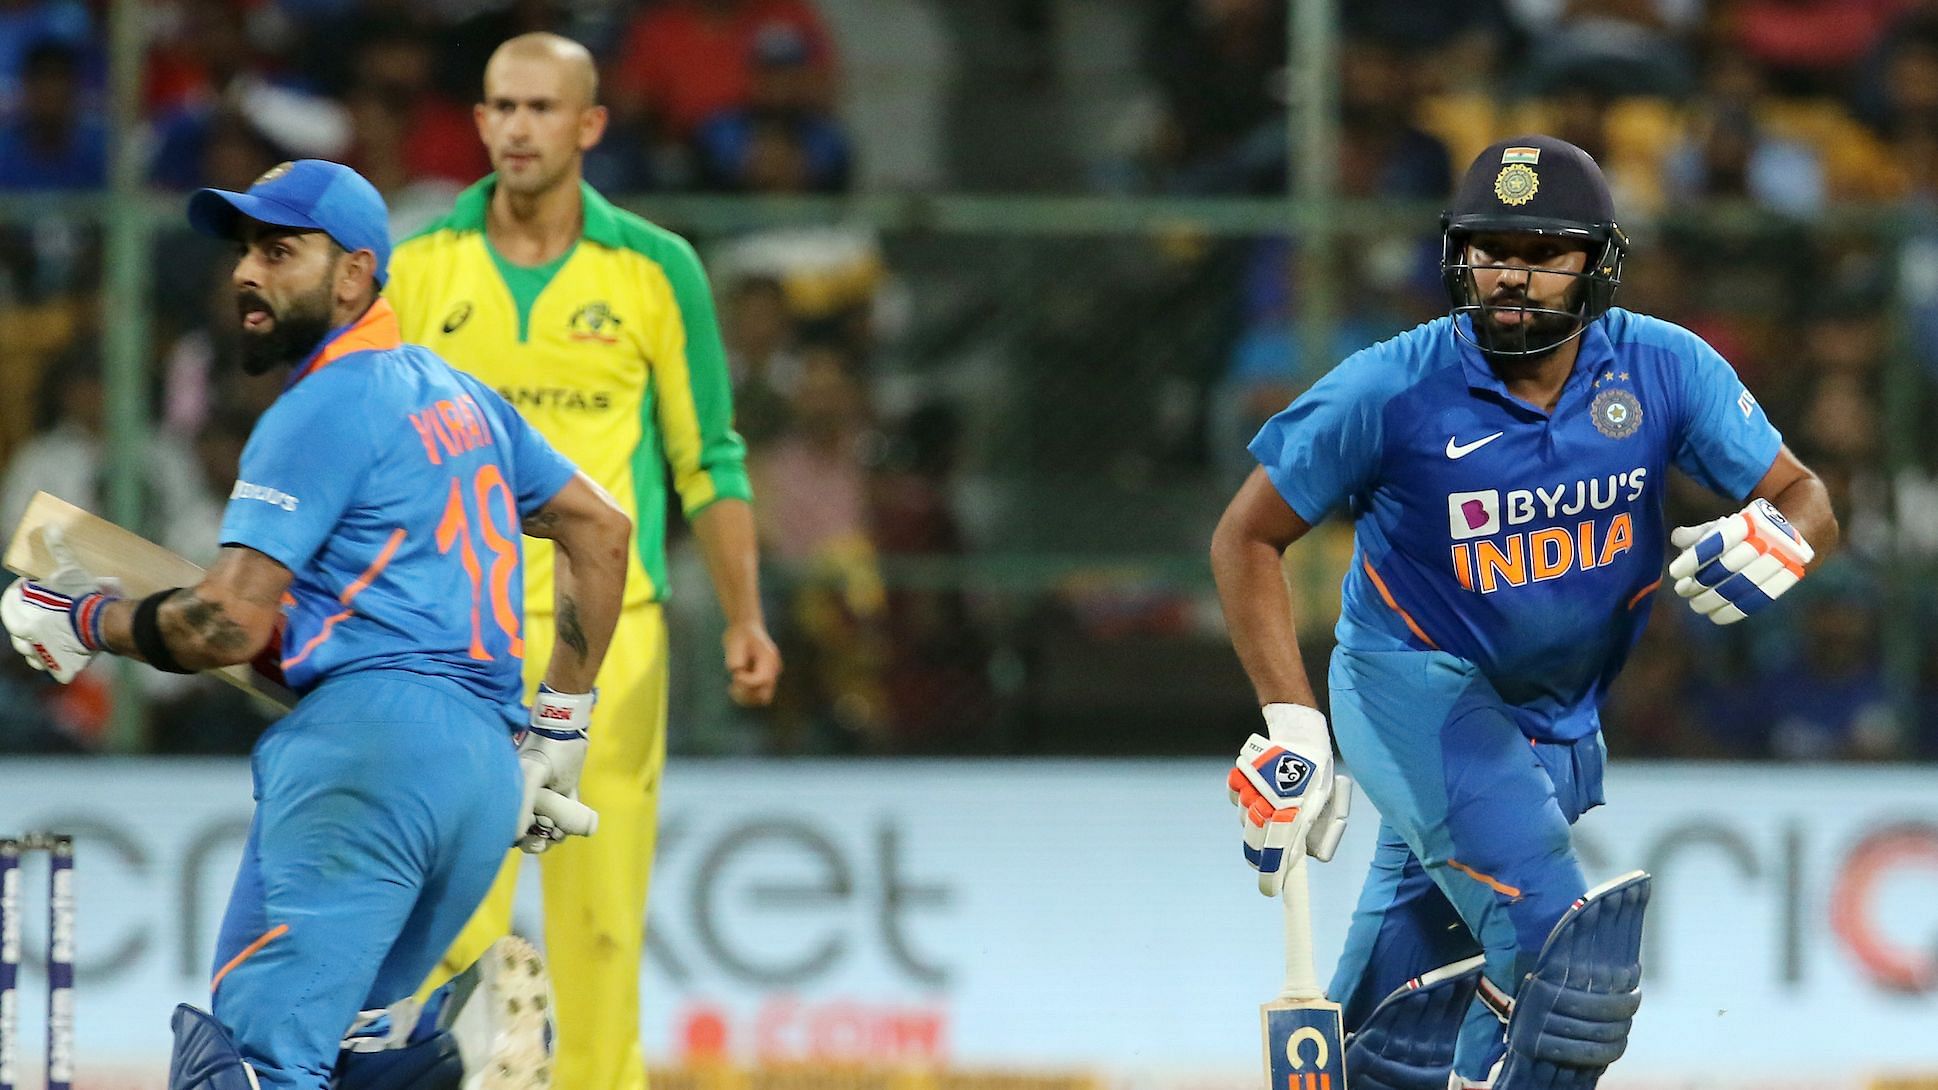 Virat Kohli and Rohit Sharma struck a partnership of 137 runs for the second wicket in Bengaluru.